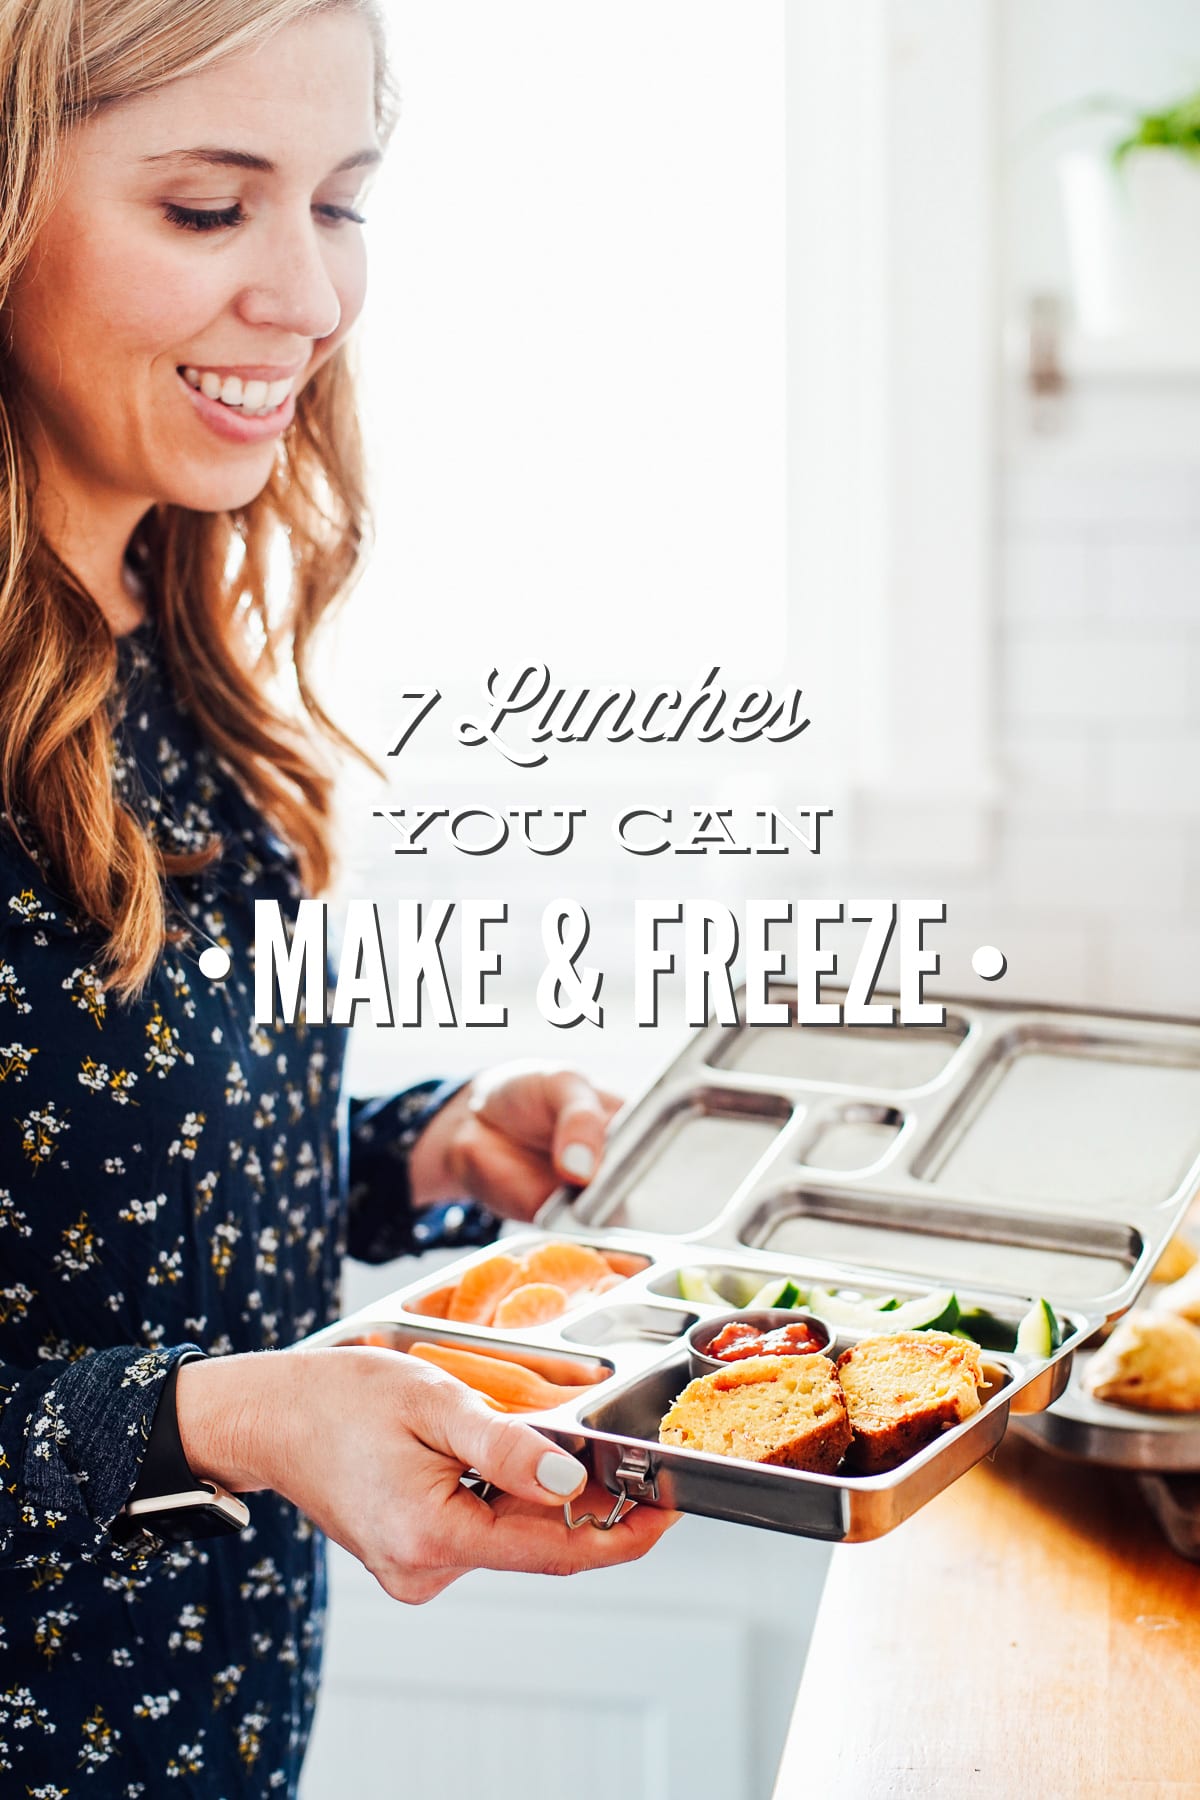 8 Lunches to Make and Freeze (School Lunch Meal Prep)